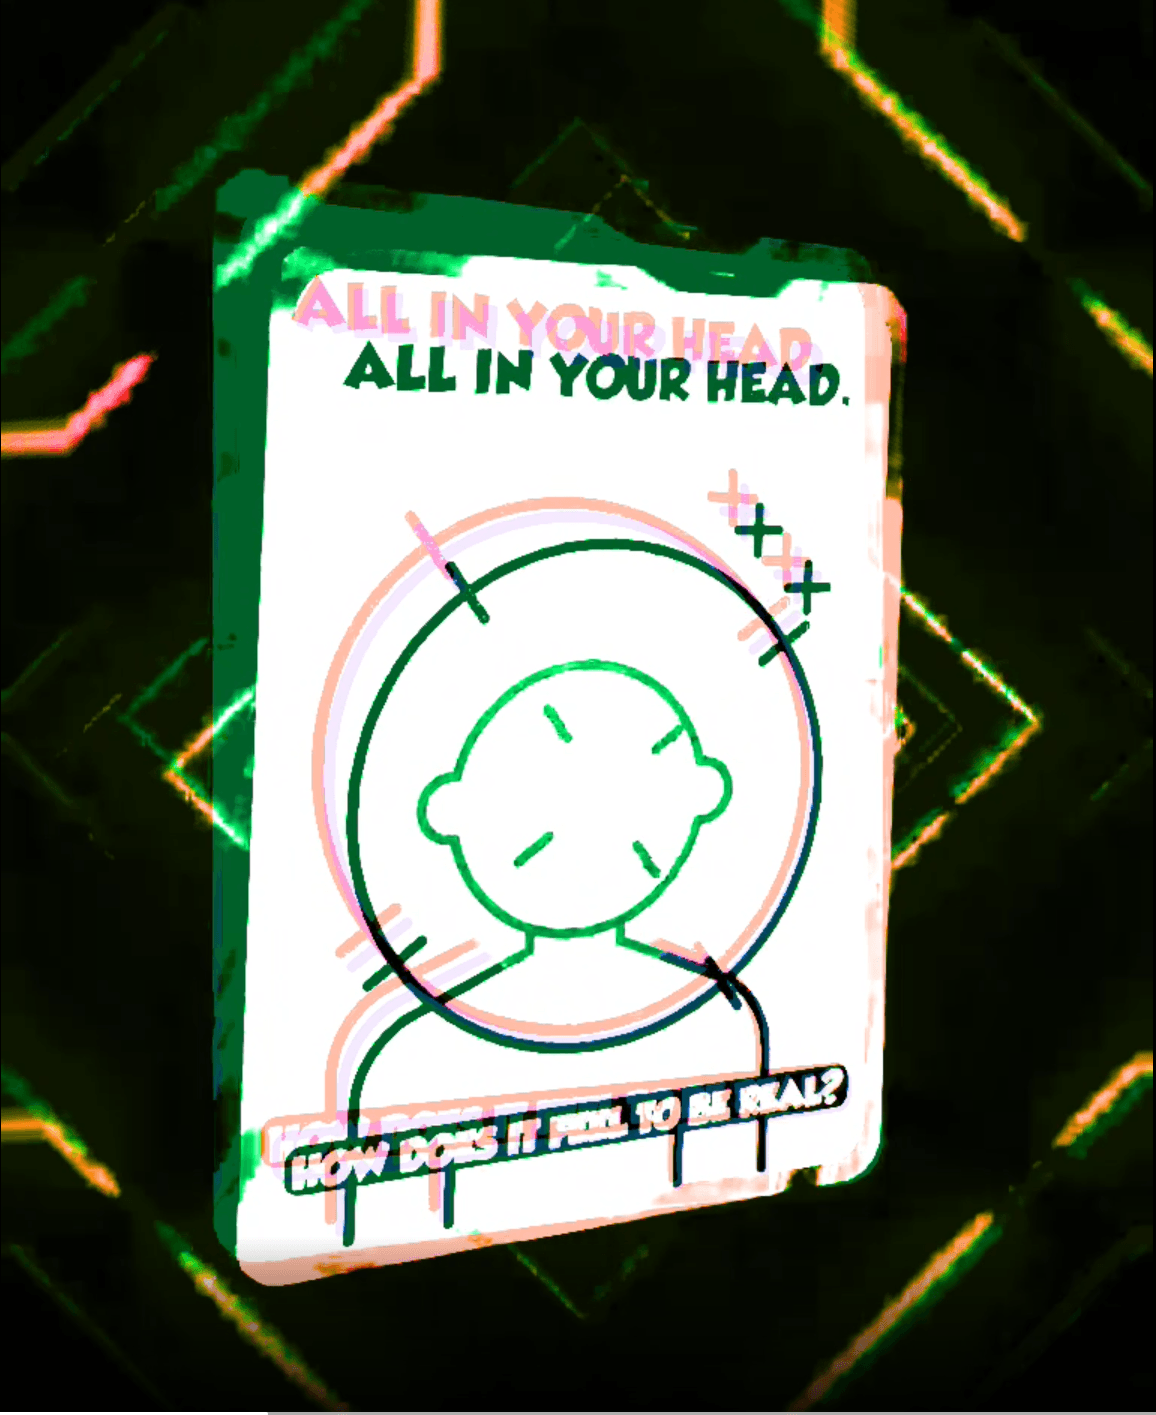 All in your head "How does it feel to be real?" "3 0'Clock Rock" Dez Cible collectible card